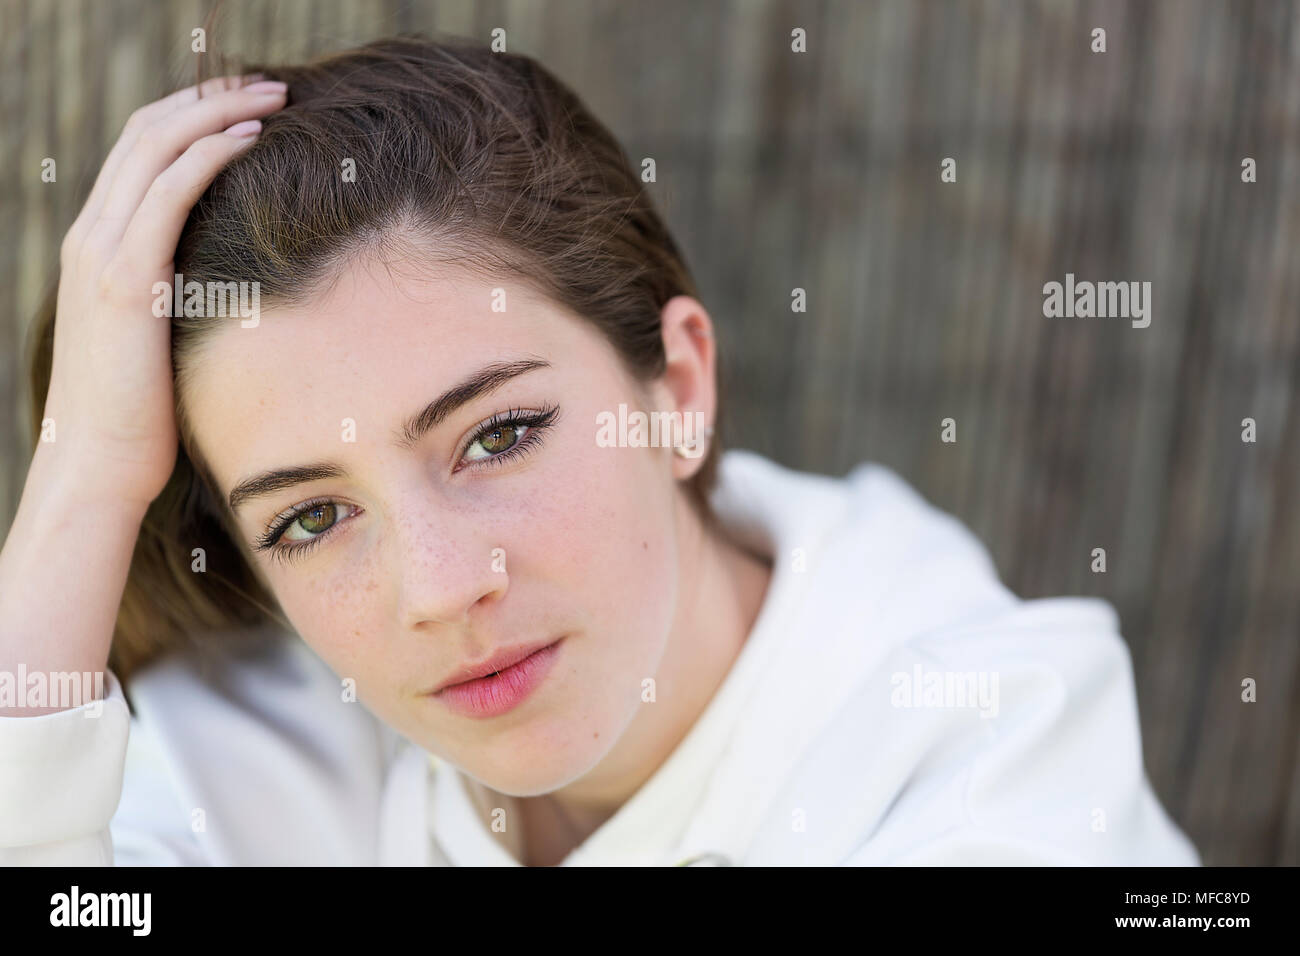 Model in a photography session. Horizontal shot with natural light. Stock Photo